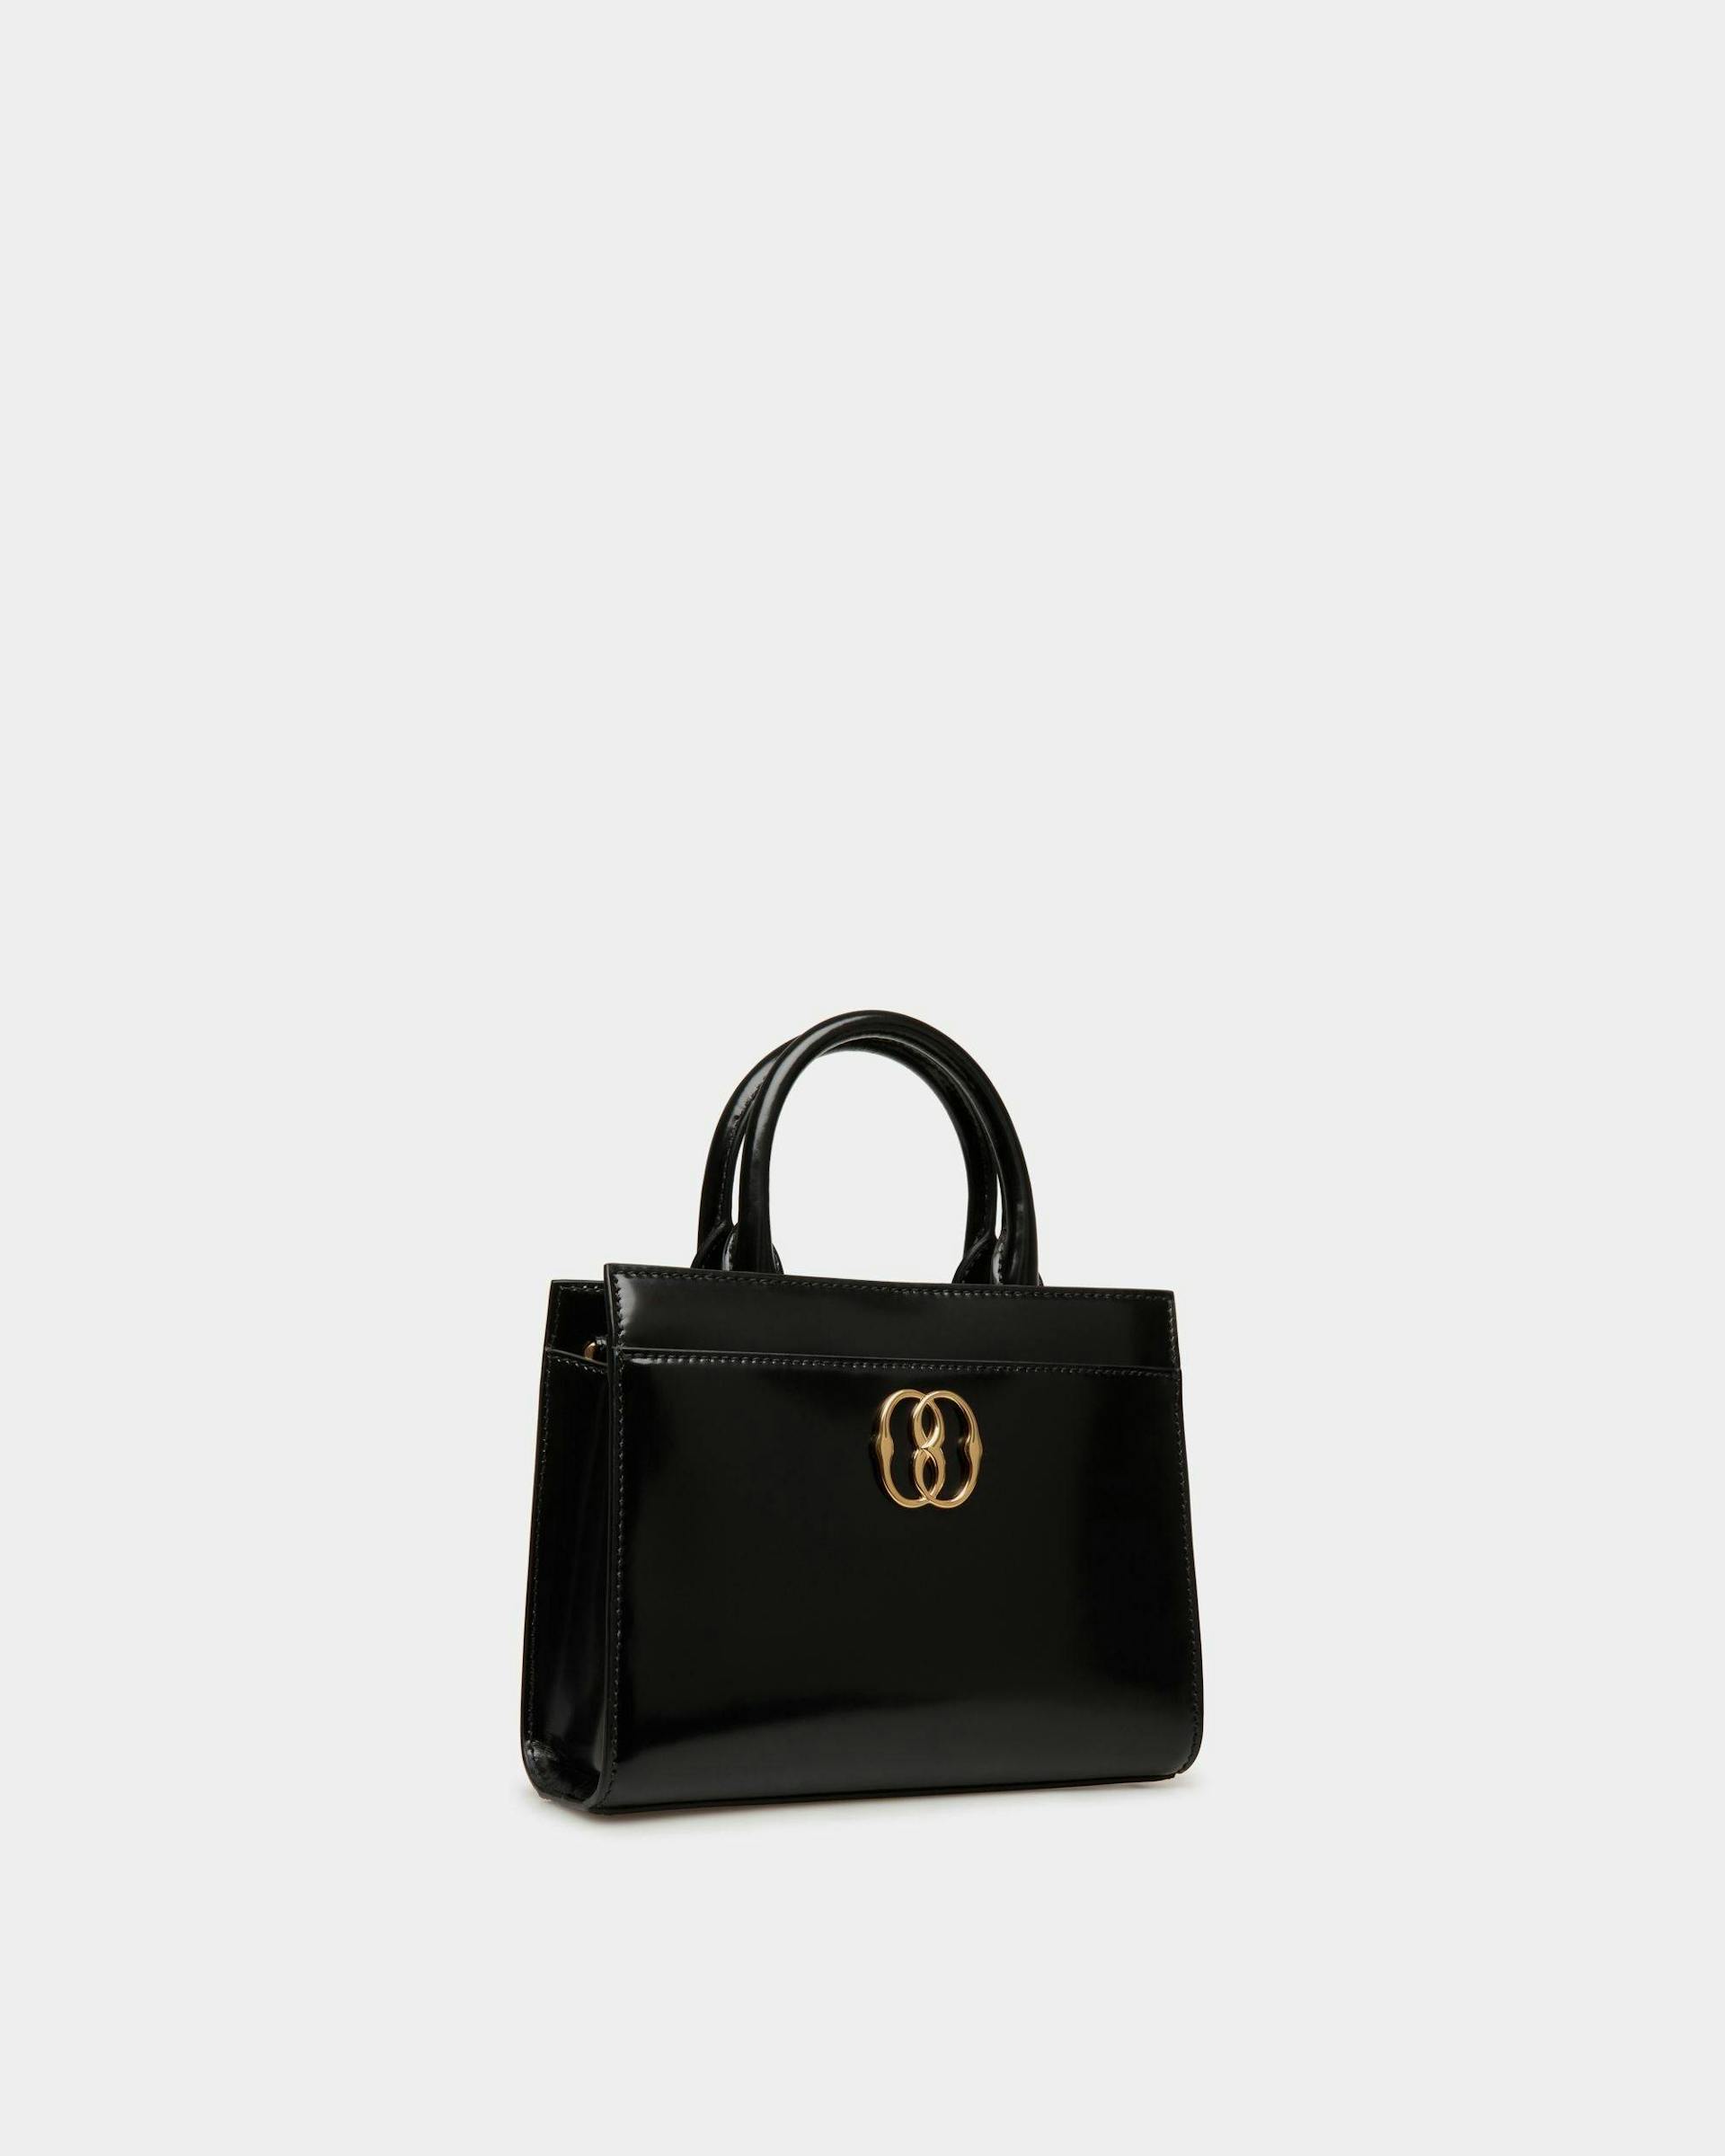 Women's Emblem Small Tote Bag In Black Patent Leather | Bally | Still Life 3/4 Front